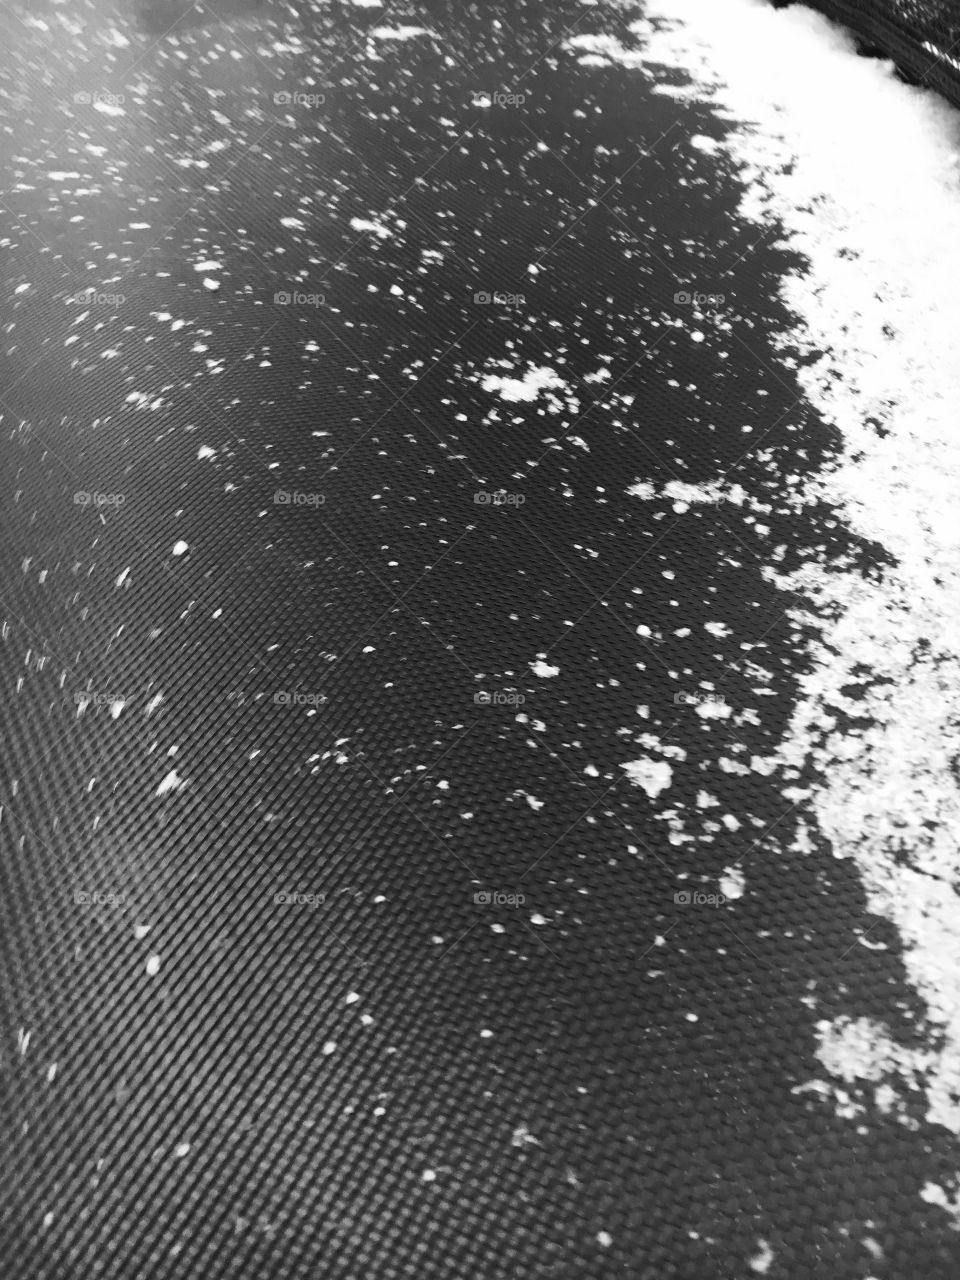 Snow on the Surface